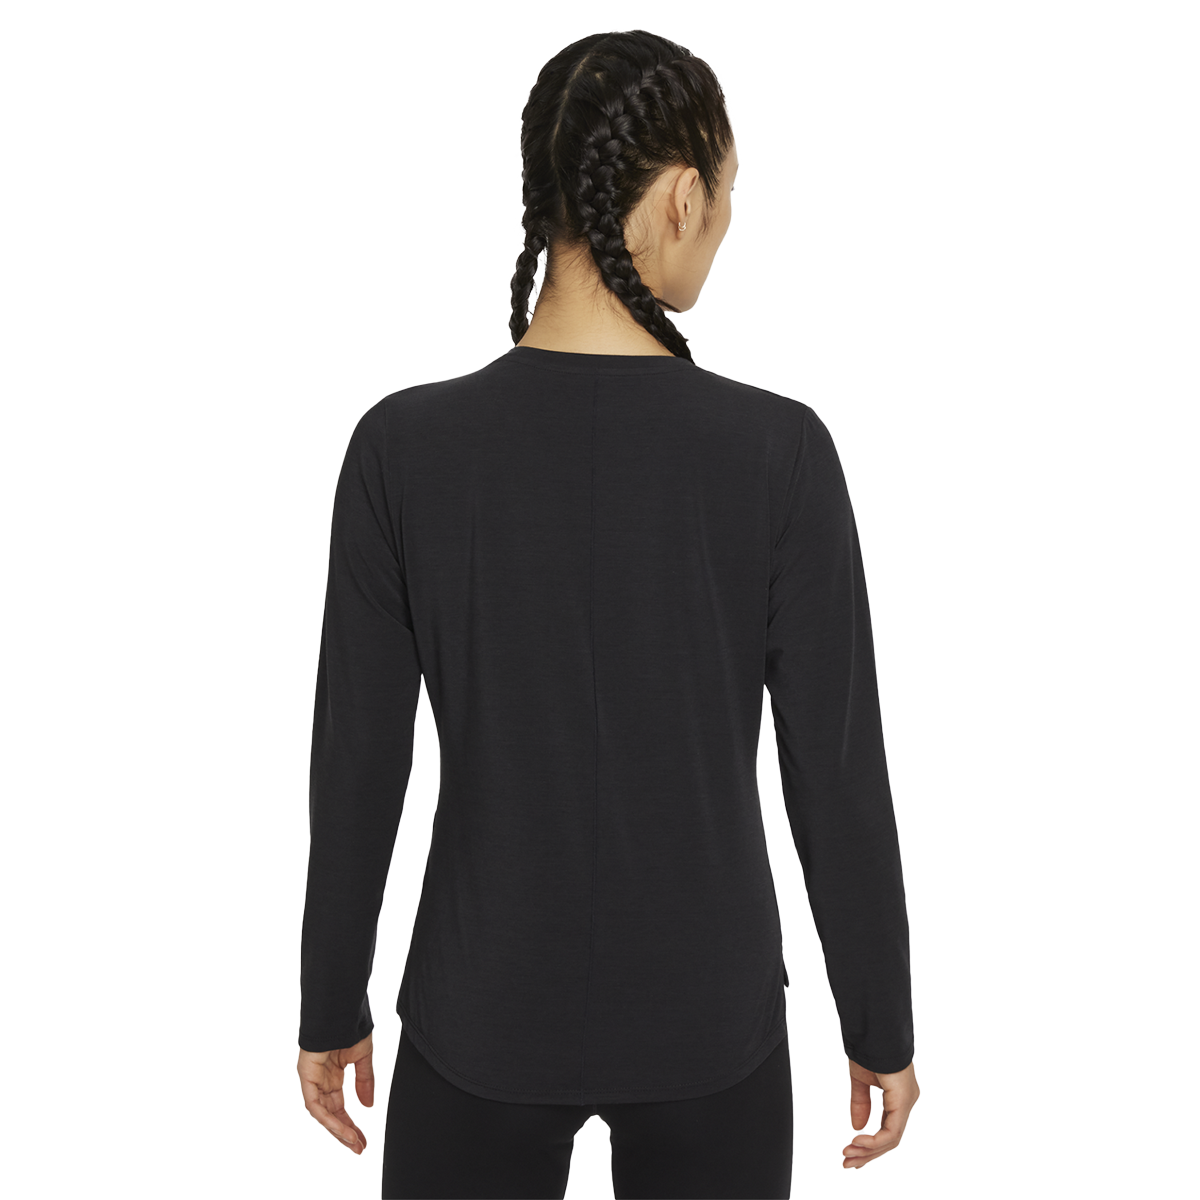 Nike Dri-FIT One Luxe Longsleeve, , large image number null